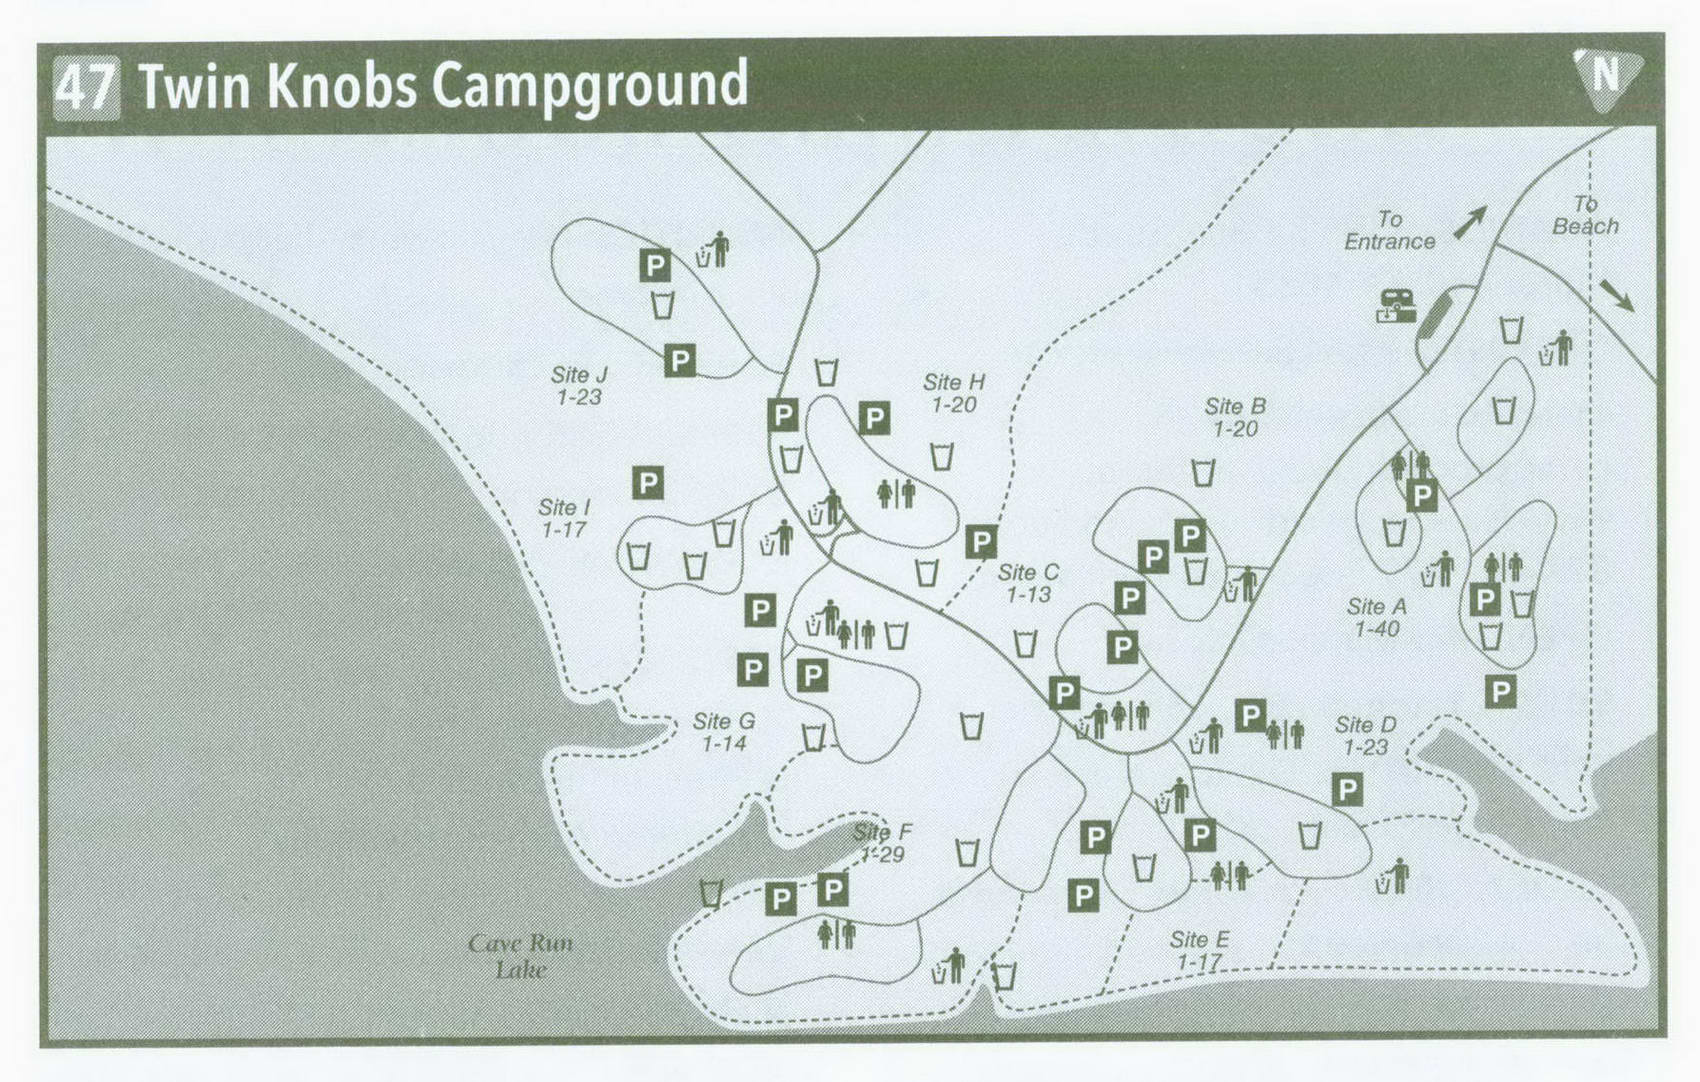 Plan of Twin Knobs Campground